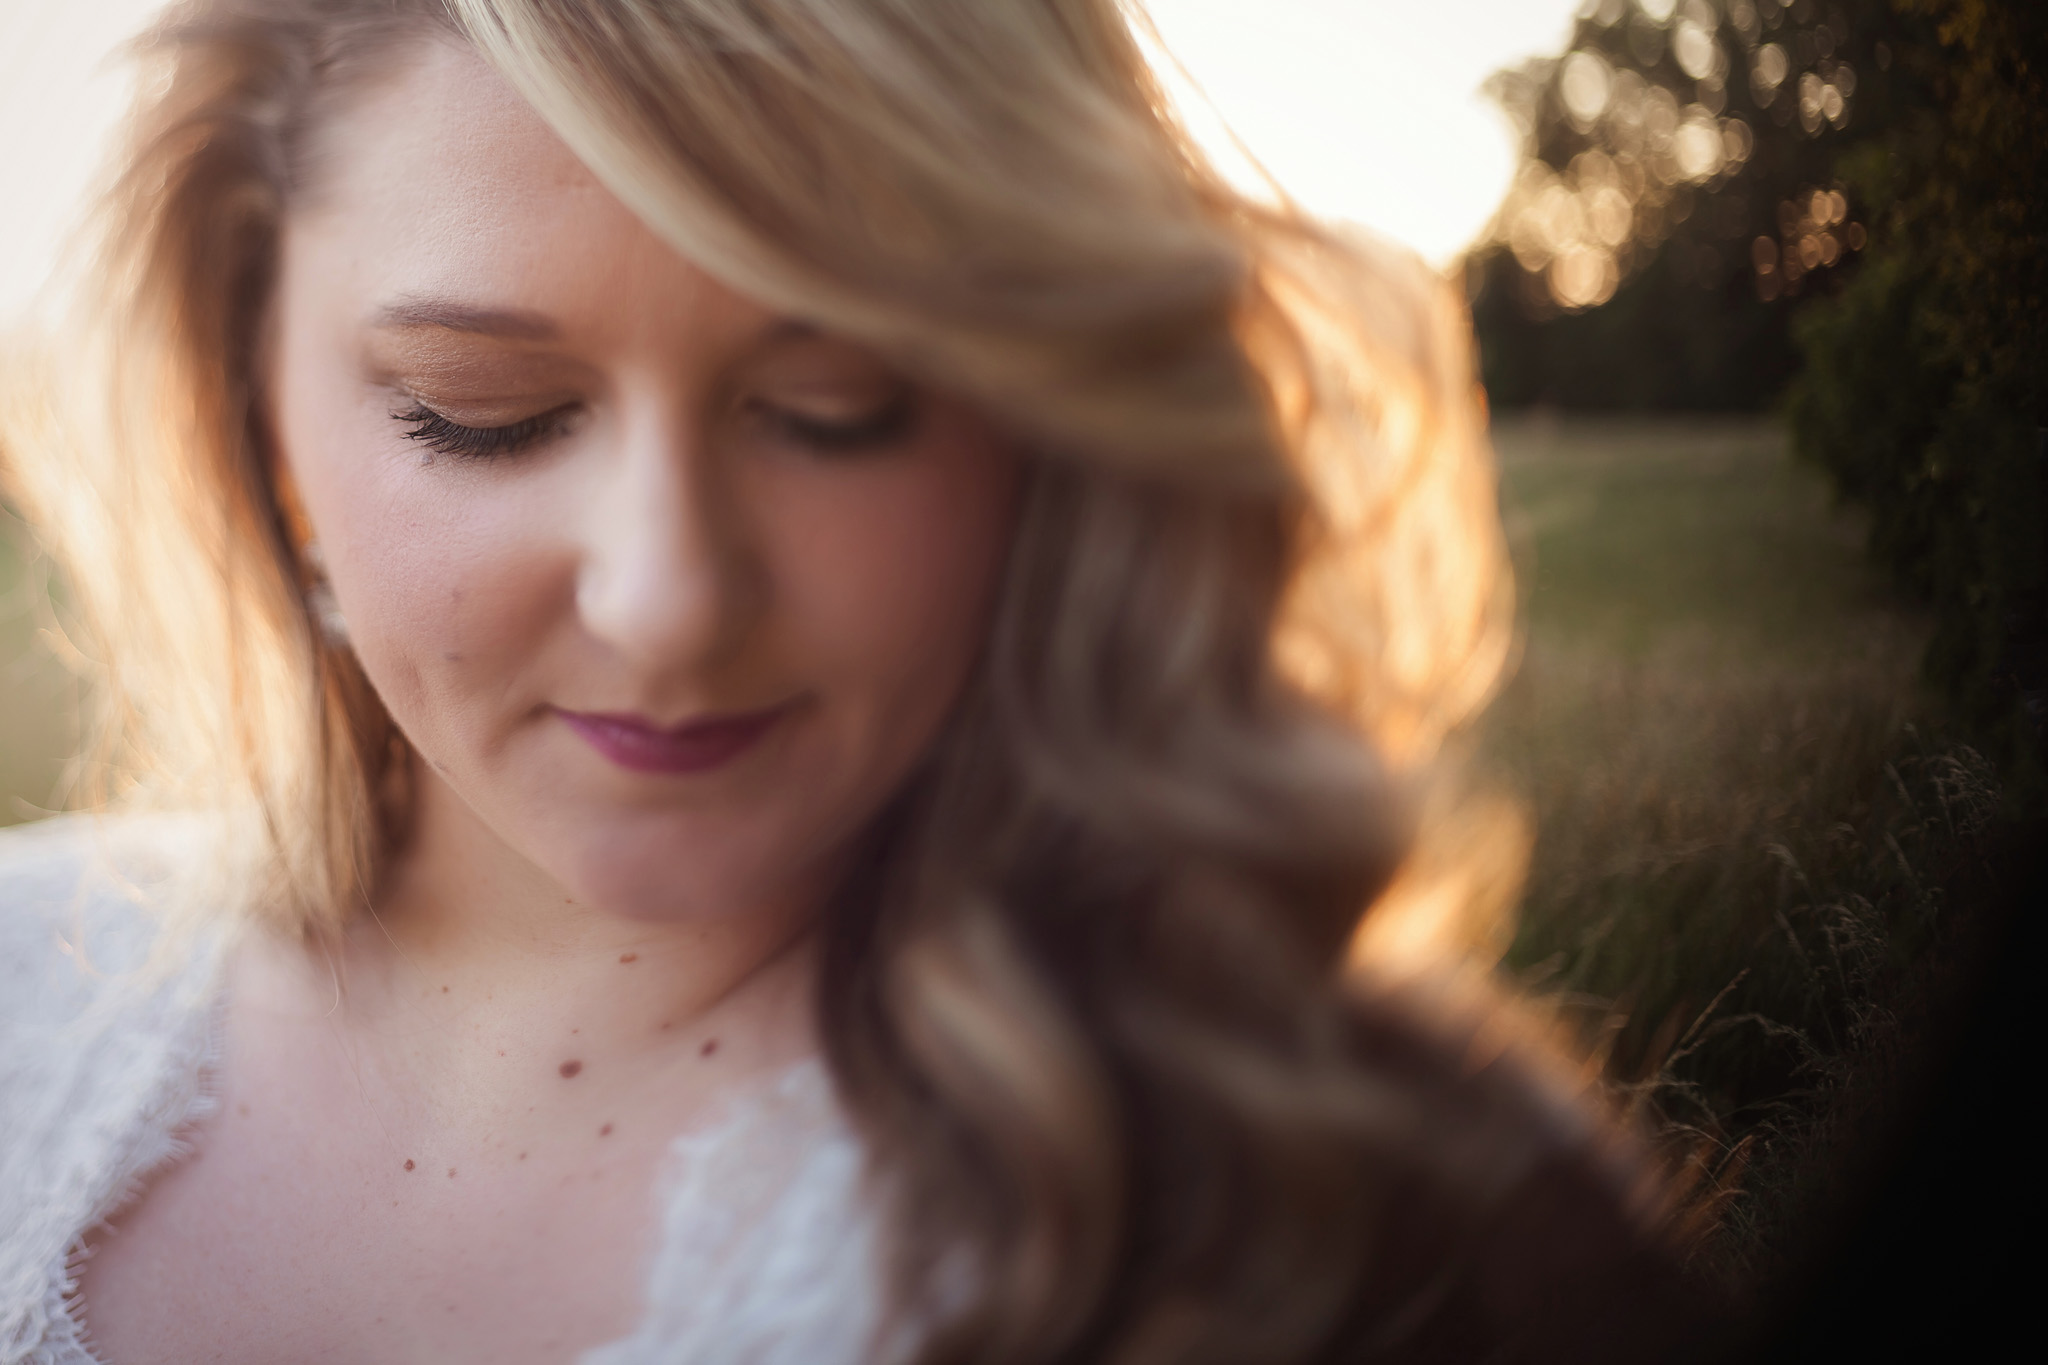 This artistic Bridal Portrait by Mabyn Ludke was taken in Asheboro, NC